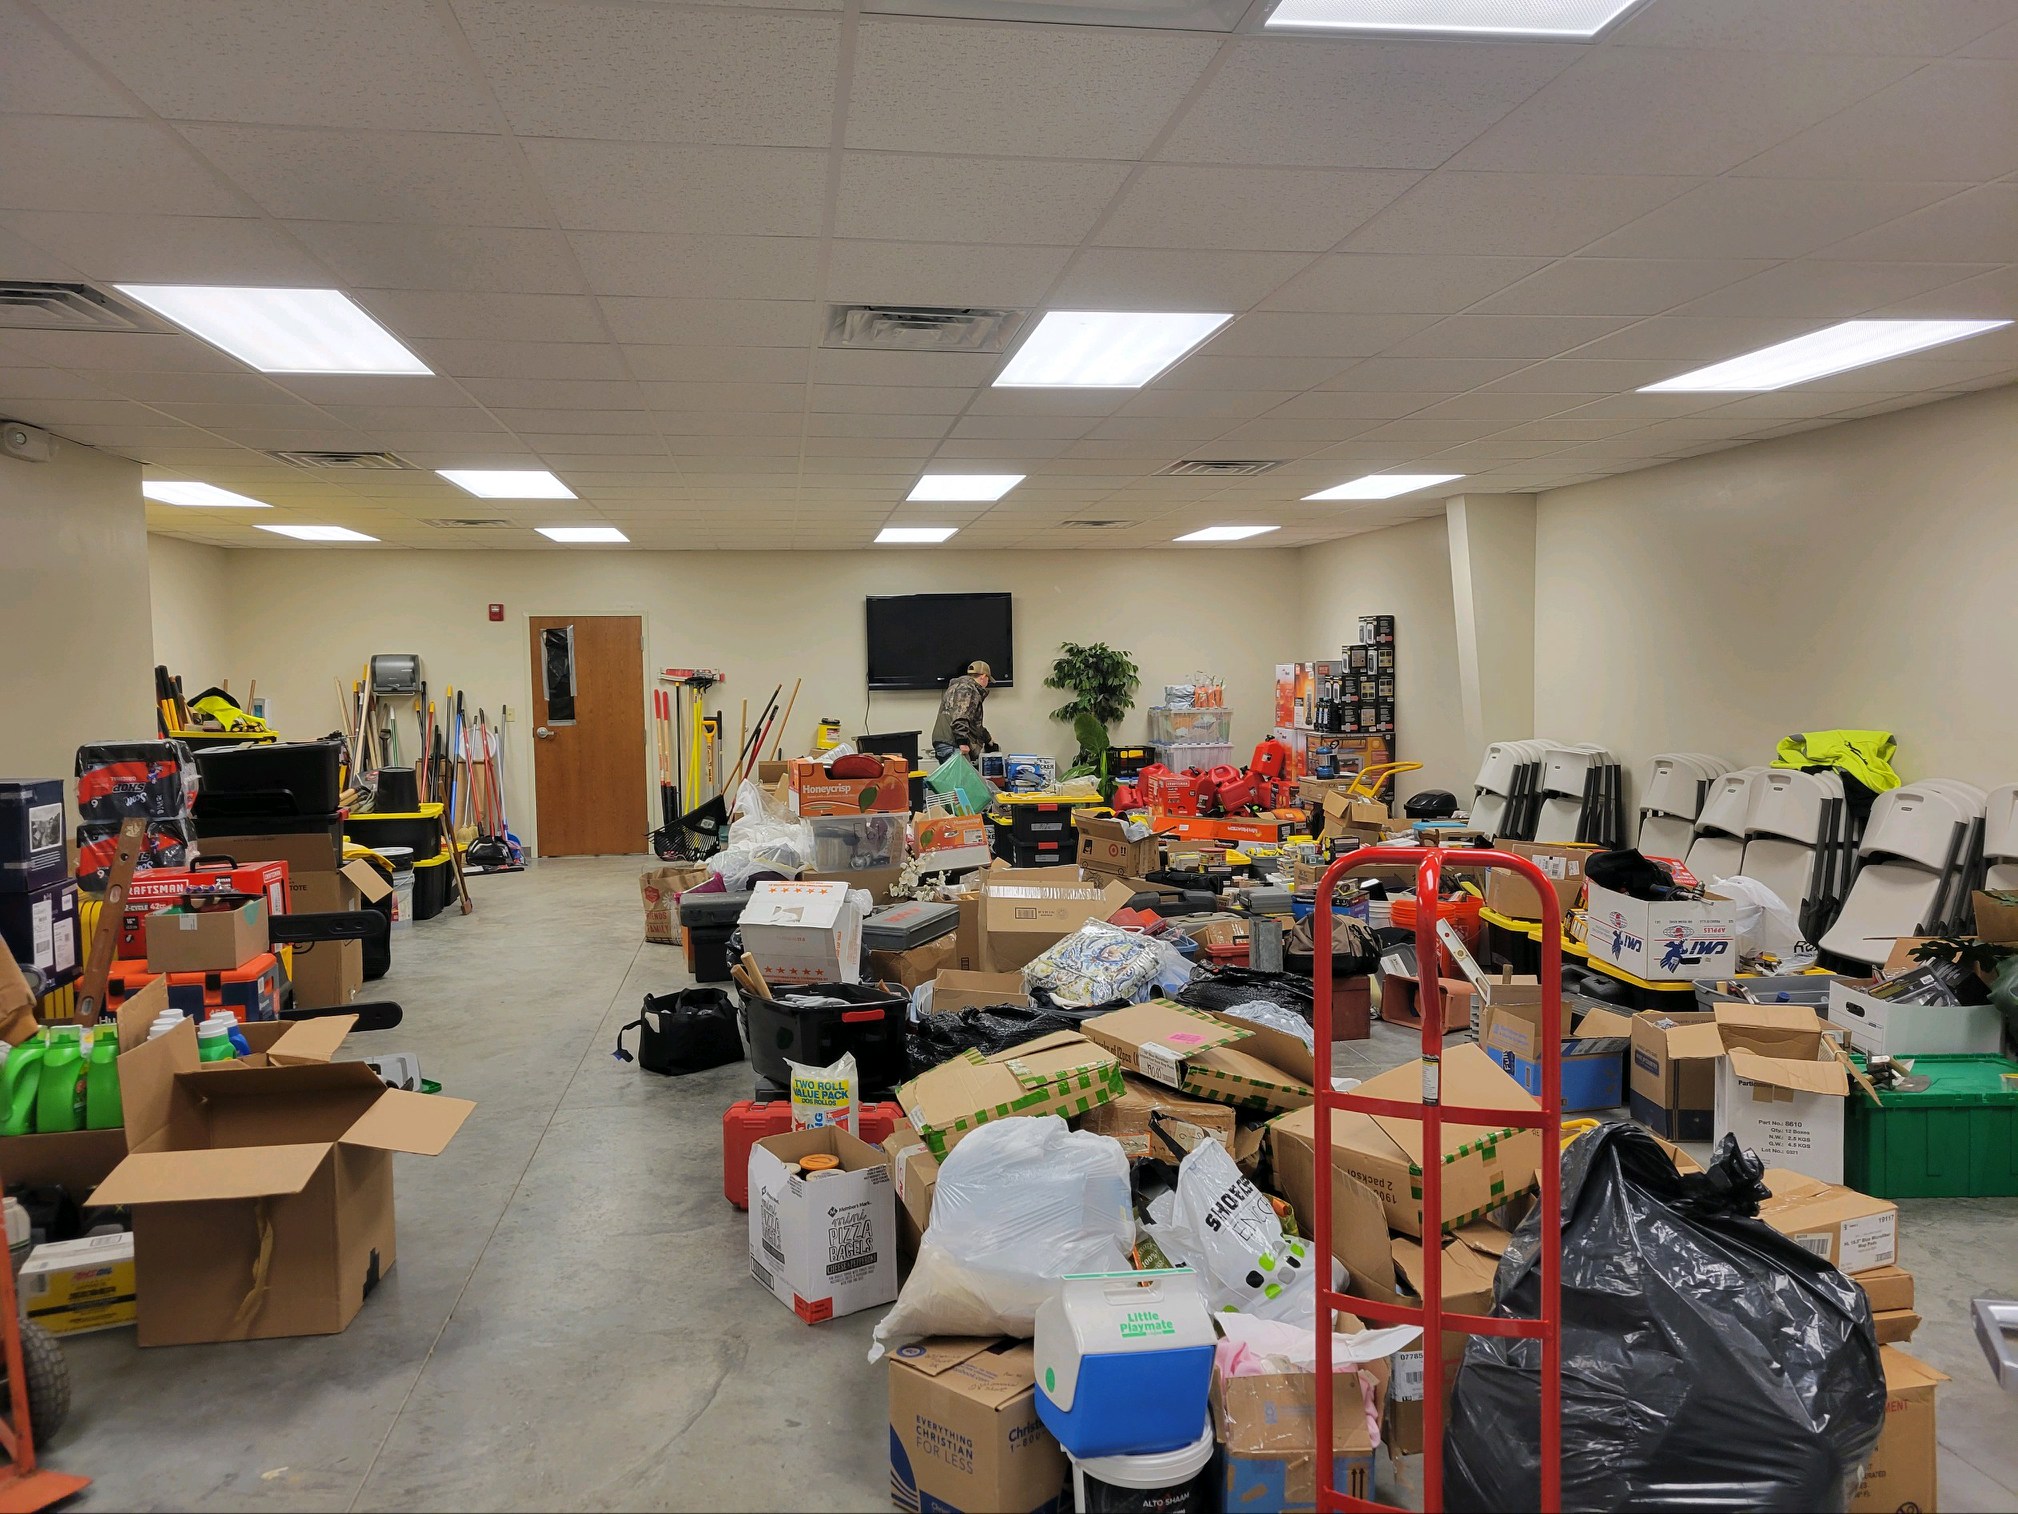 A room full of supplies from Kissells Stuff the Trucks relief drive for the communities affected by the Kentucky Tornadoes